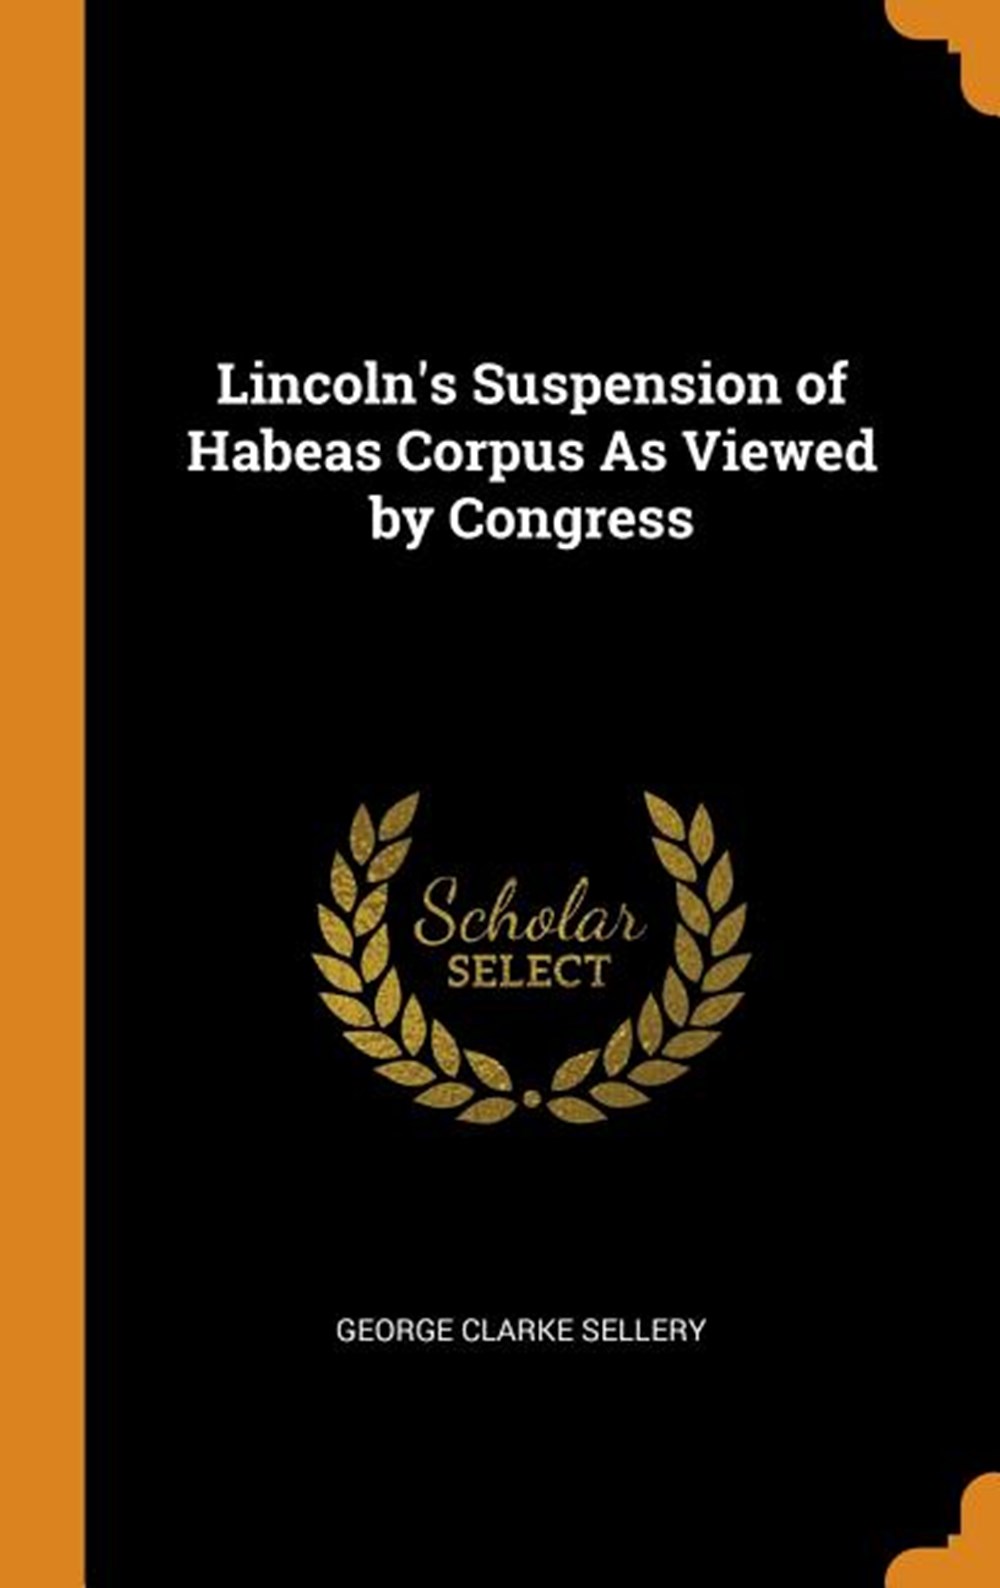 Lincoln's Suspension of Habeas Corpus as Viewed by Congress